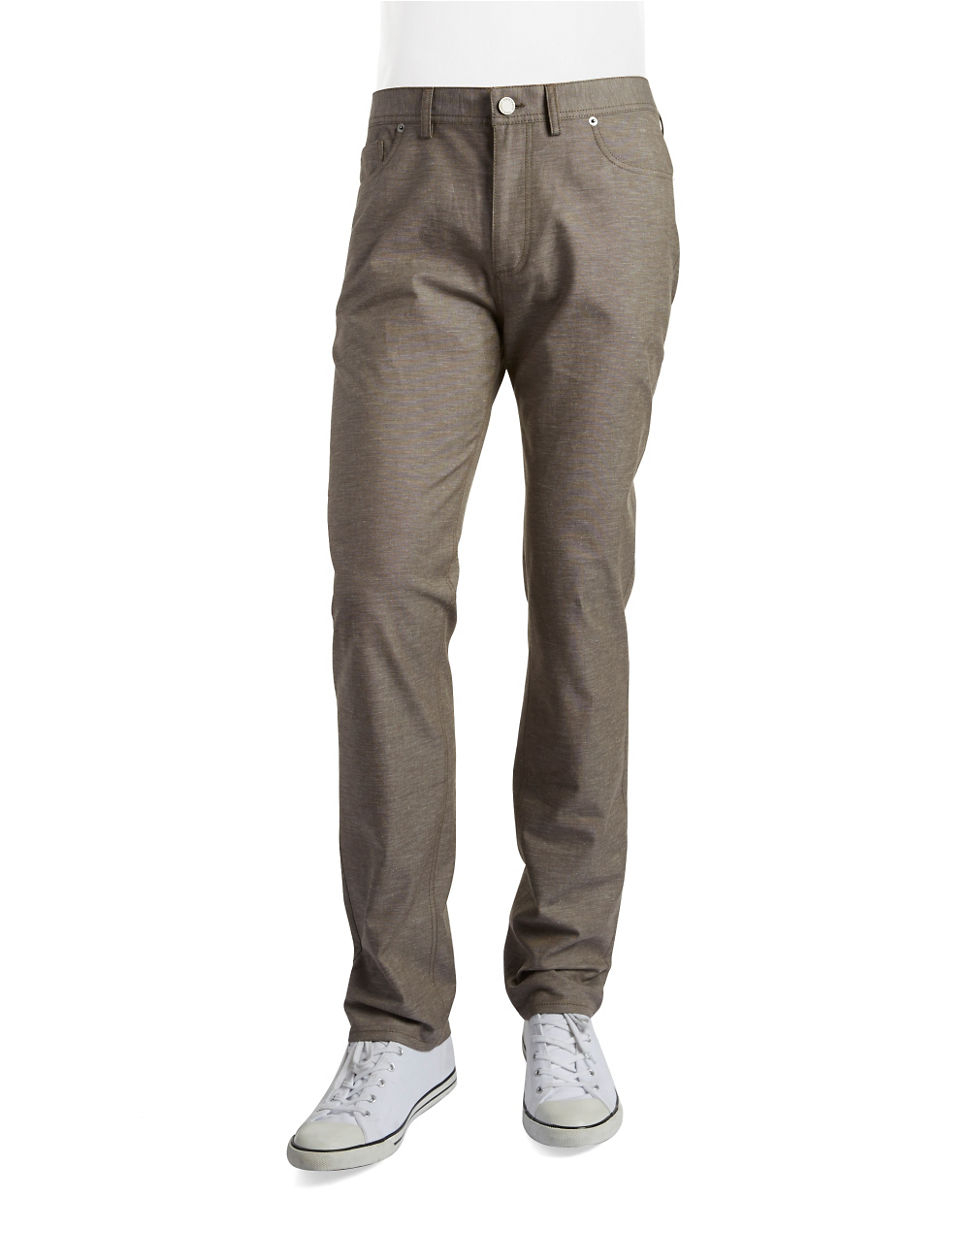 Lyst - Vince Camuto Crosshatch Pants in Natural for Men